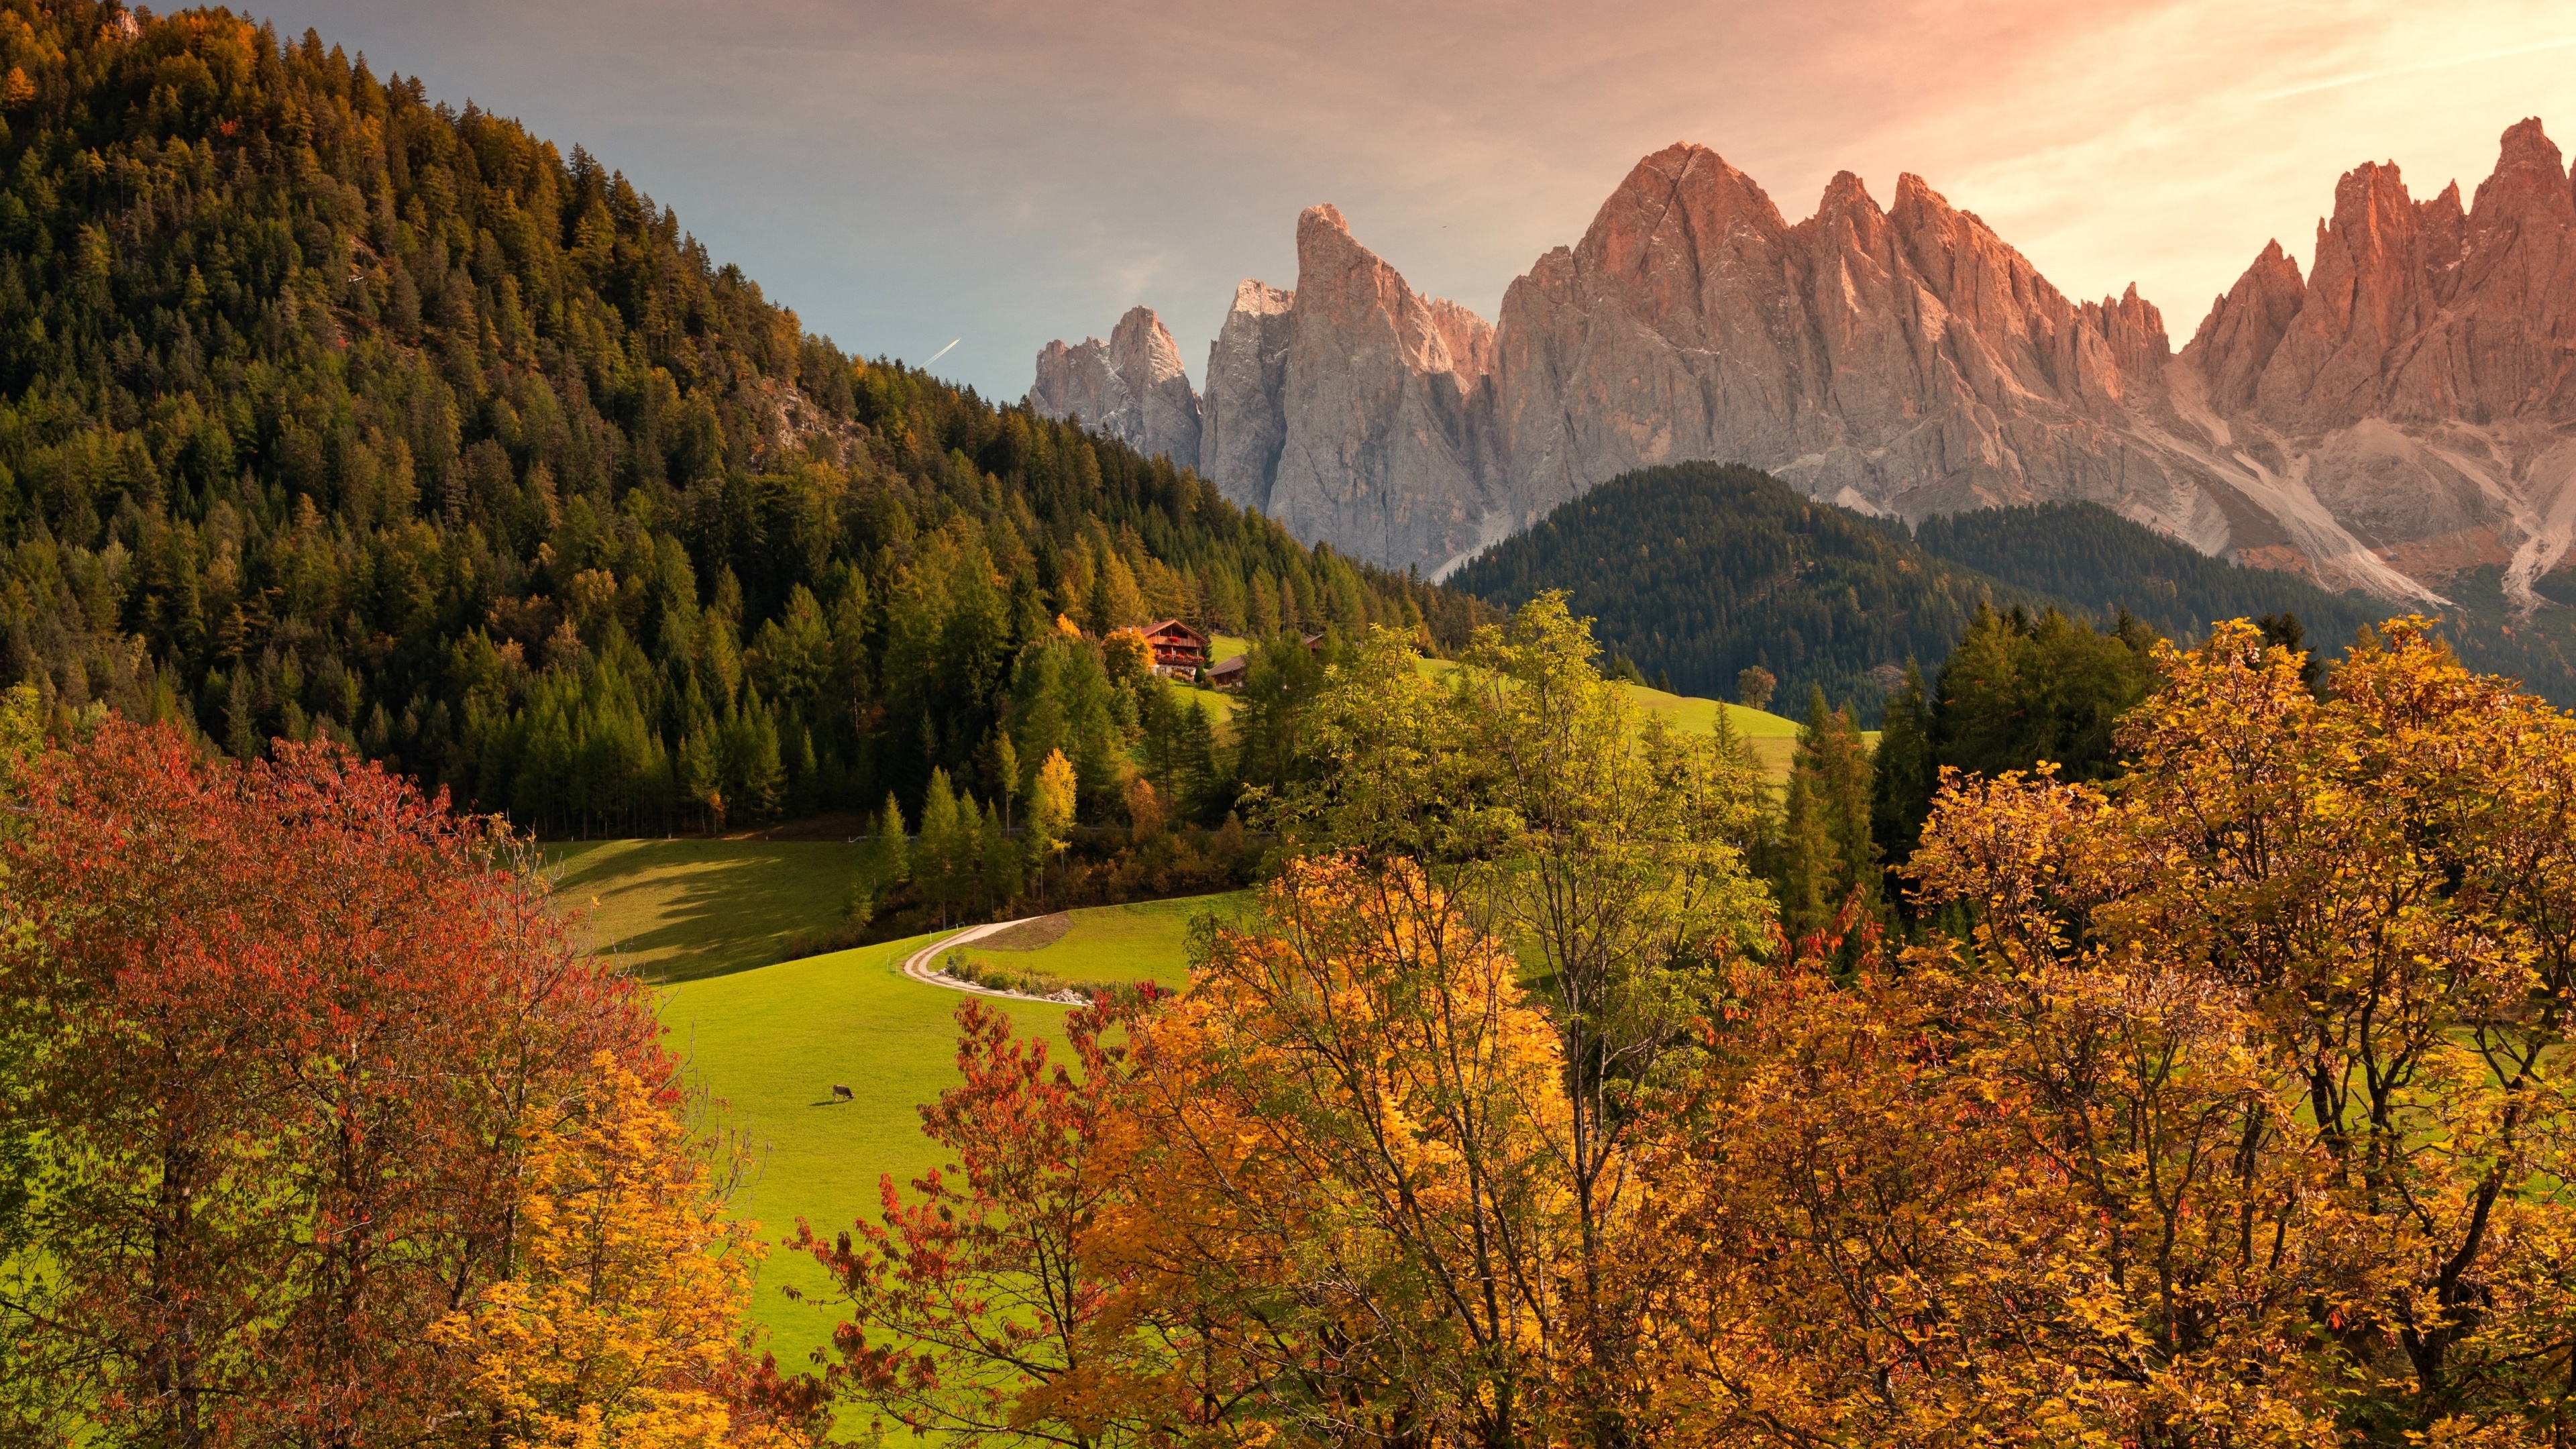 Landscape: Val di Funes, A storybook valley in the heart of South Tyrol, The Dolomites. 3840x2160 4K Wallpaper.